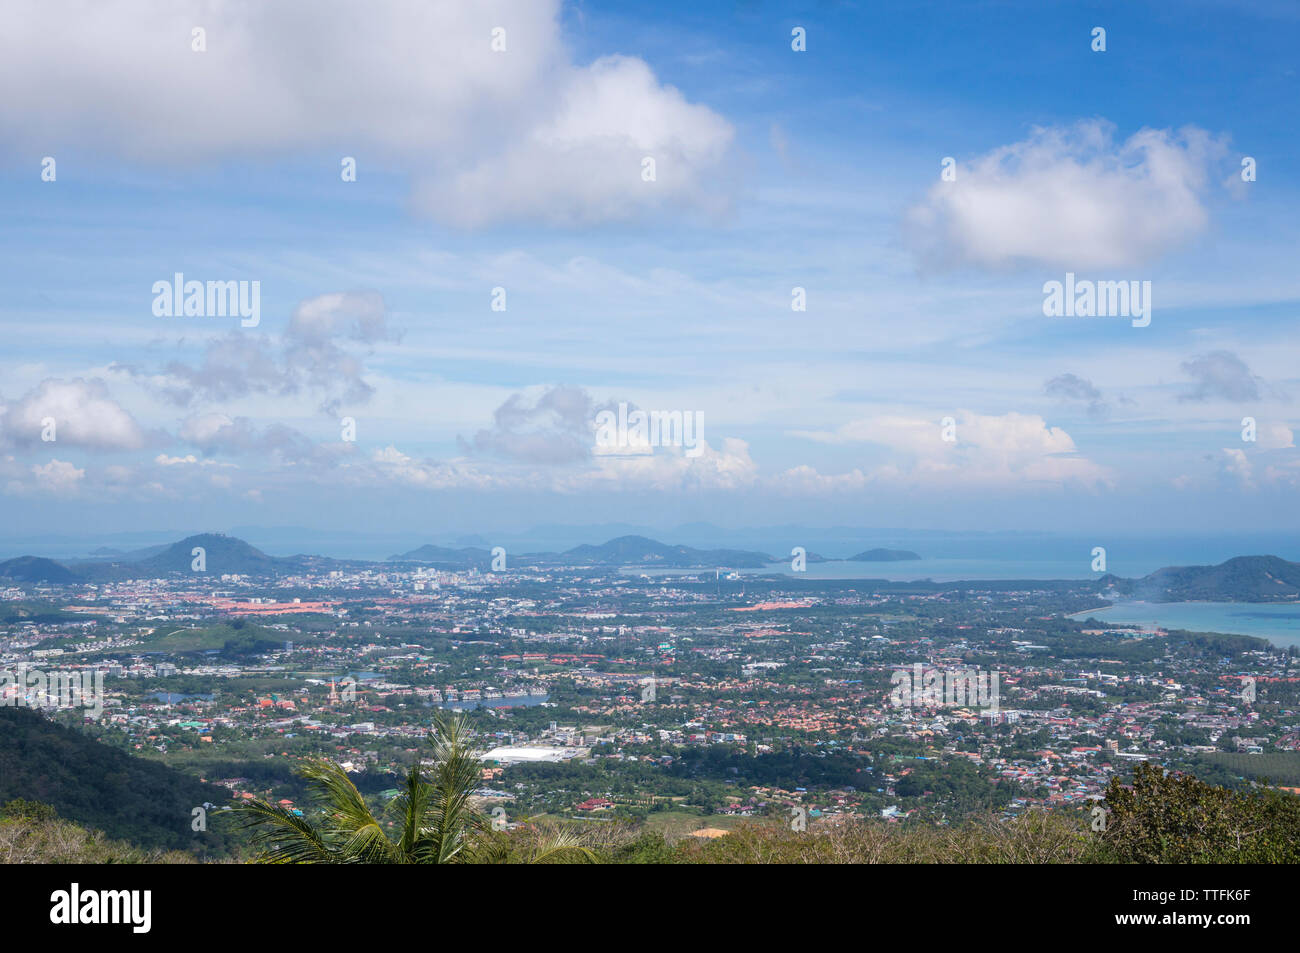 Aerial view of landscape against cloudy sky during sunny day Stock Photo